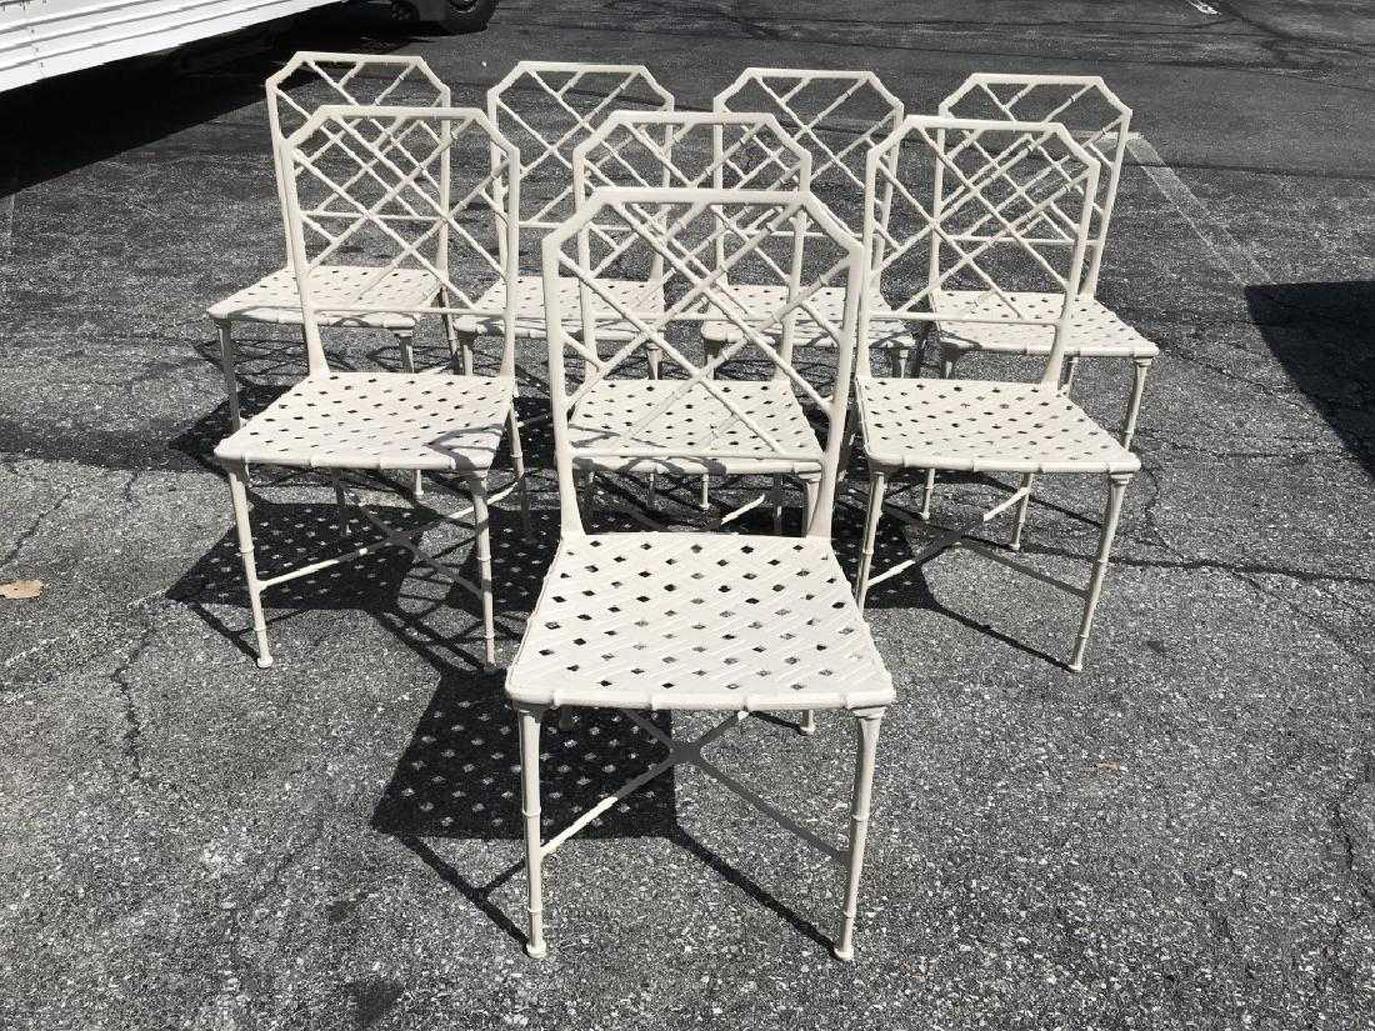 Set of 8 vintage Hollywood regency iron faux bamboo style garden chairs in cream toned finish. Outdoor Garden Chairs, Cast Iron Garden Furniture, Patio Furniture.
     